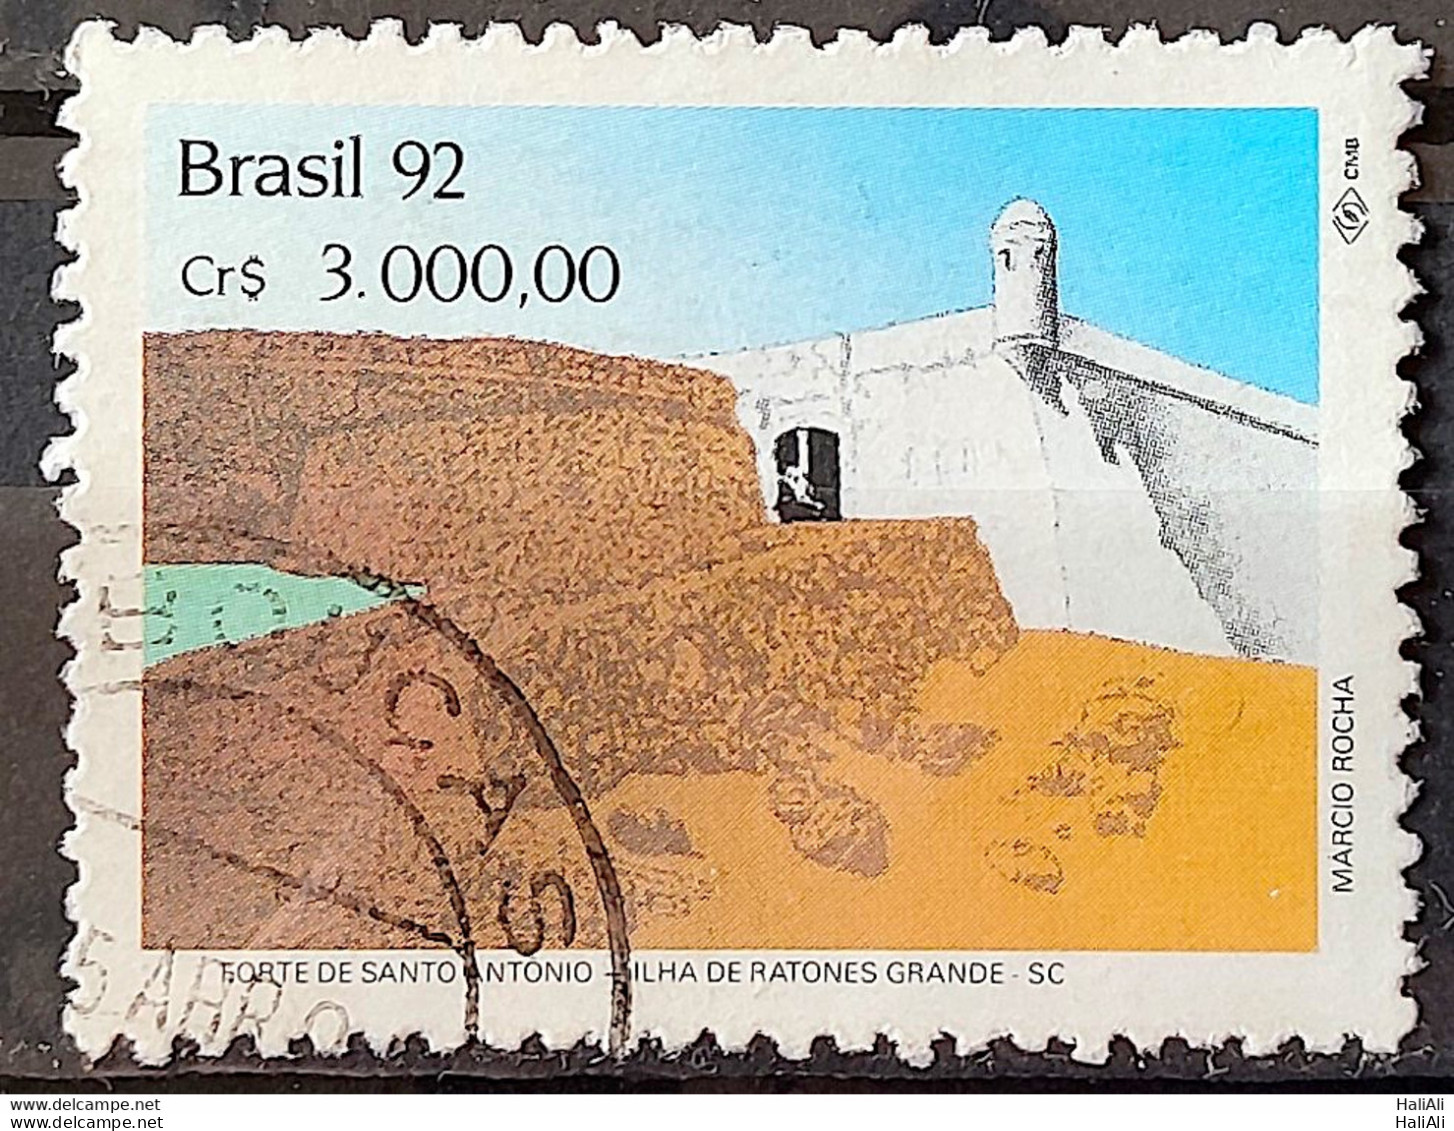 C 1816 Brazil Stamp Strong Military Architecture Big Ratone Island SC 1992 Circulated 1 - Oblitérés